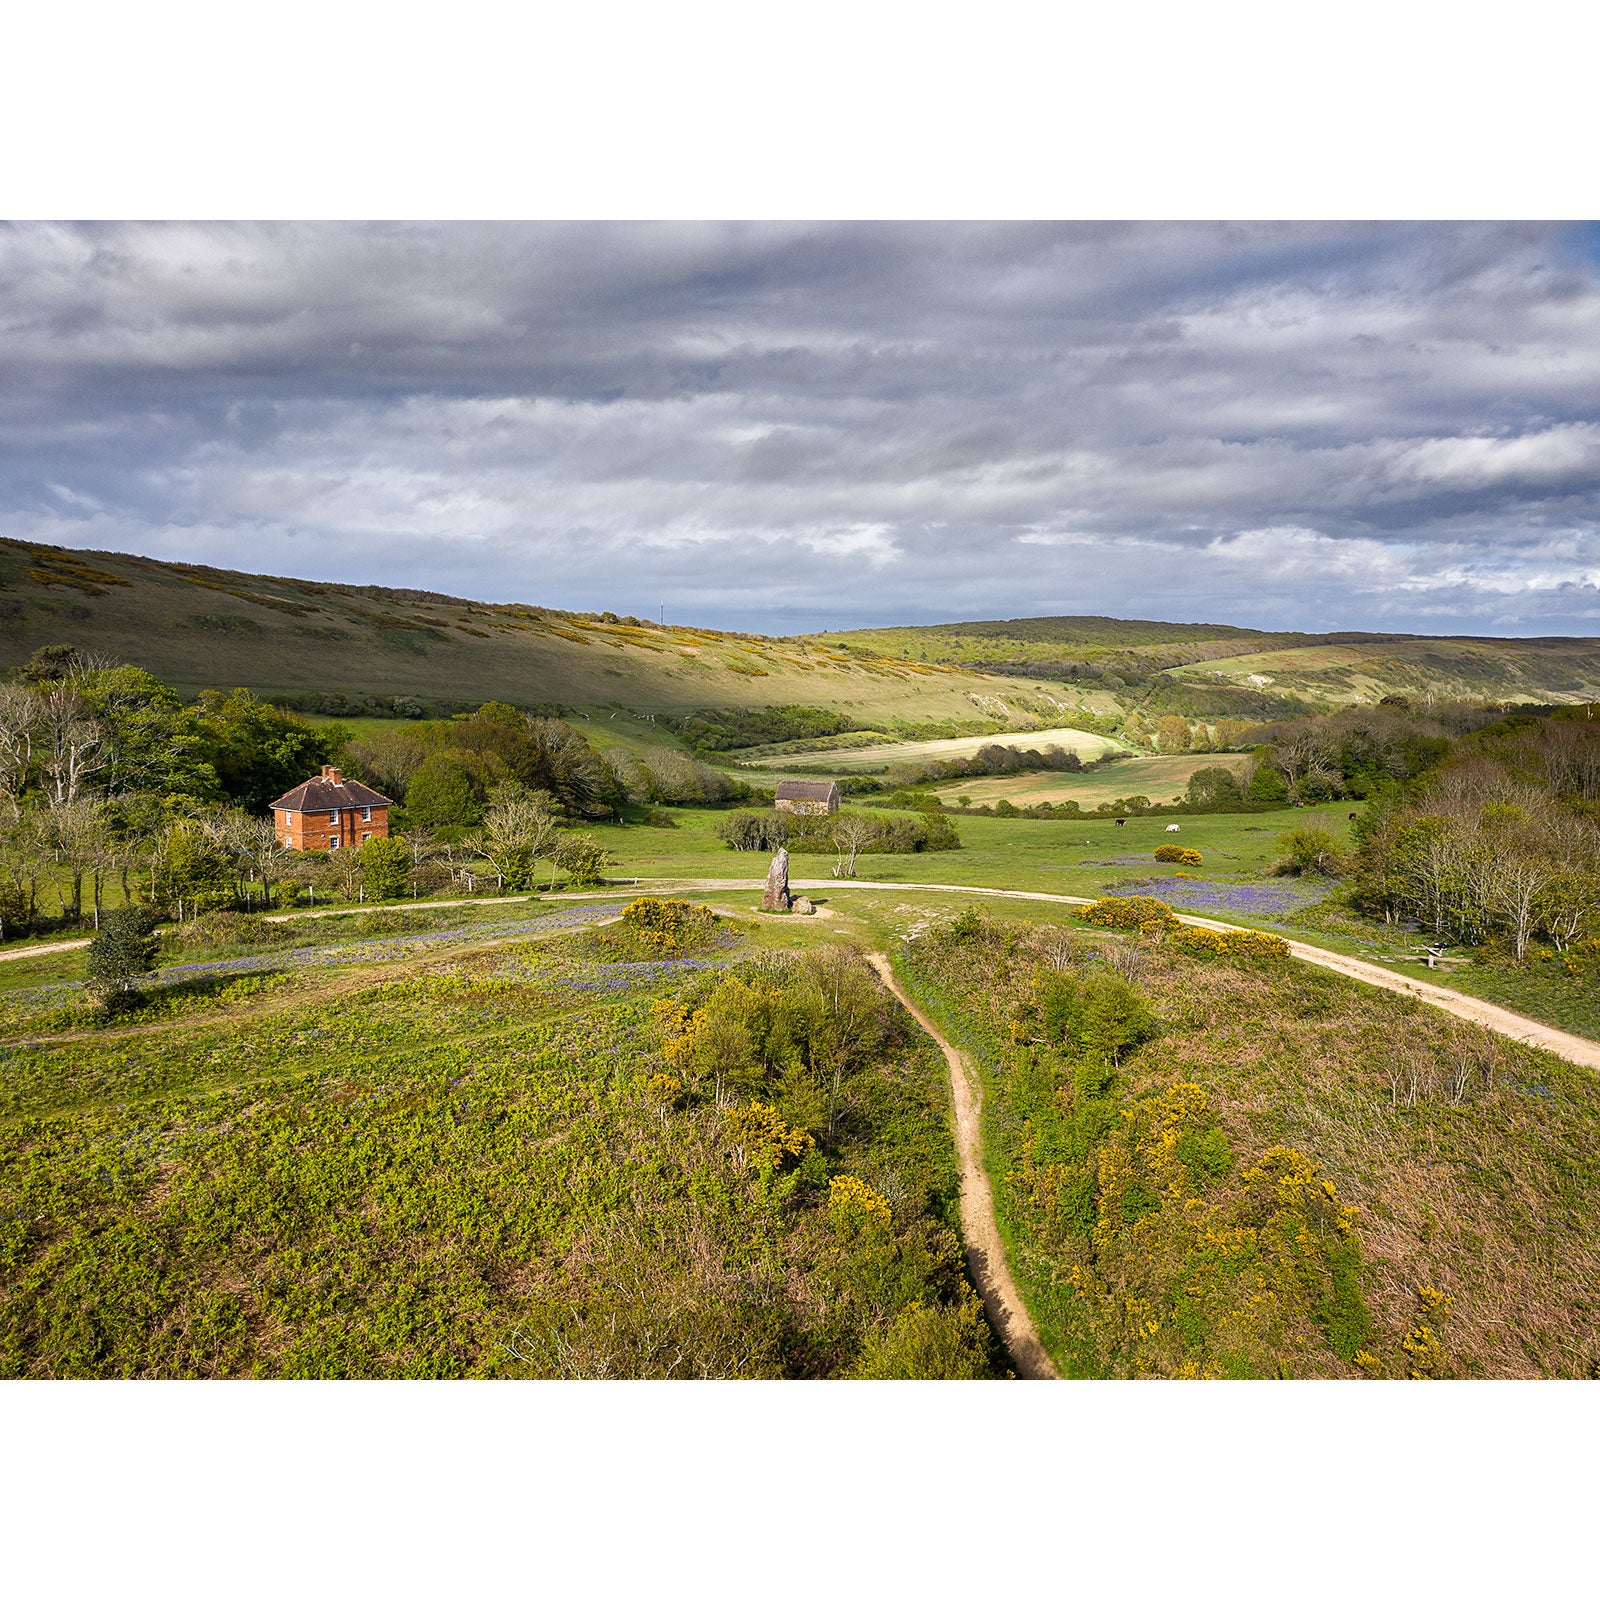 Pastoral landscape with a winding path leading to a Longstone house amidst lush greenery under a cloudy sky captured by Available Light Photography.